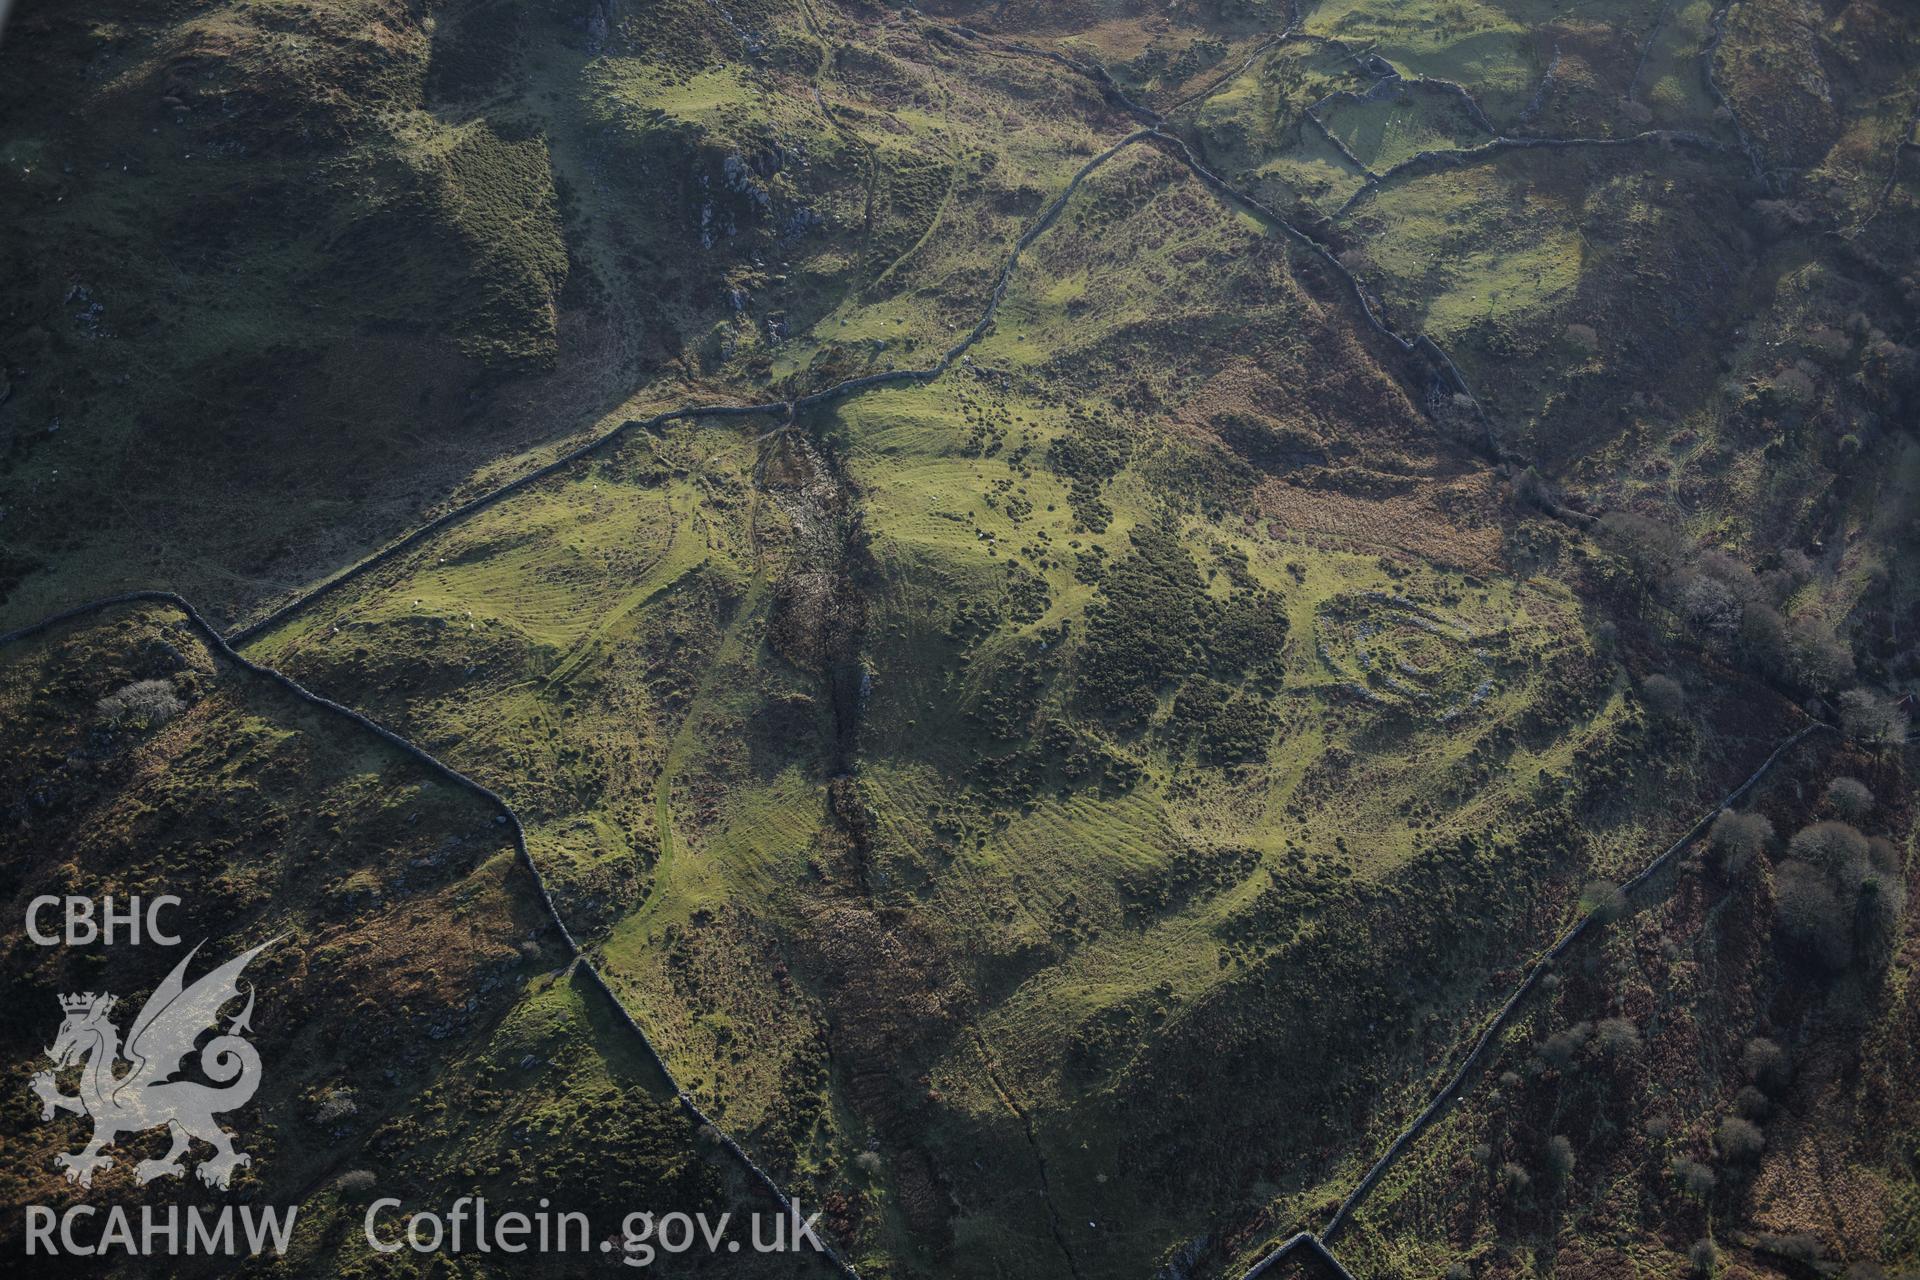 RCAHMW colour oblique photograph of Maes y Caerau homestead, and early cultivation. Taken by Toby Driver on 10/12/2012.